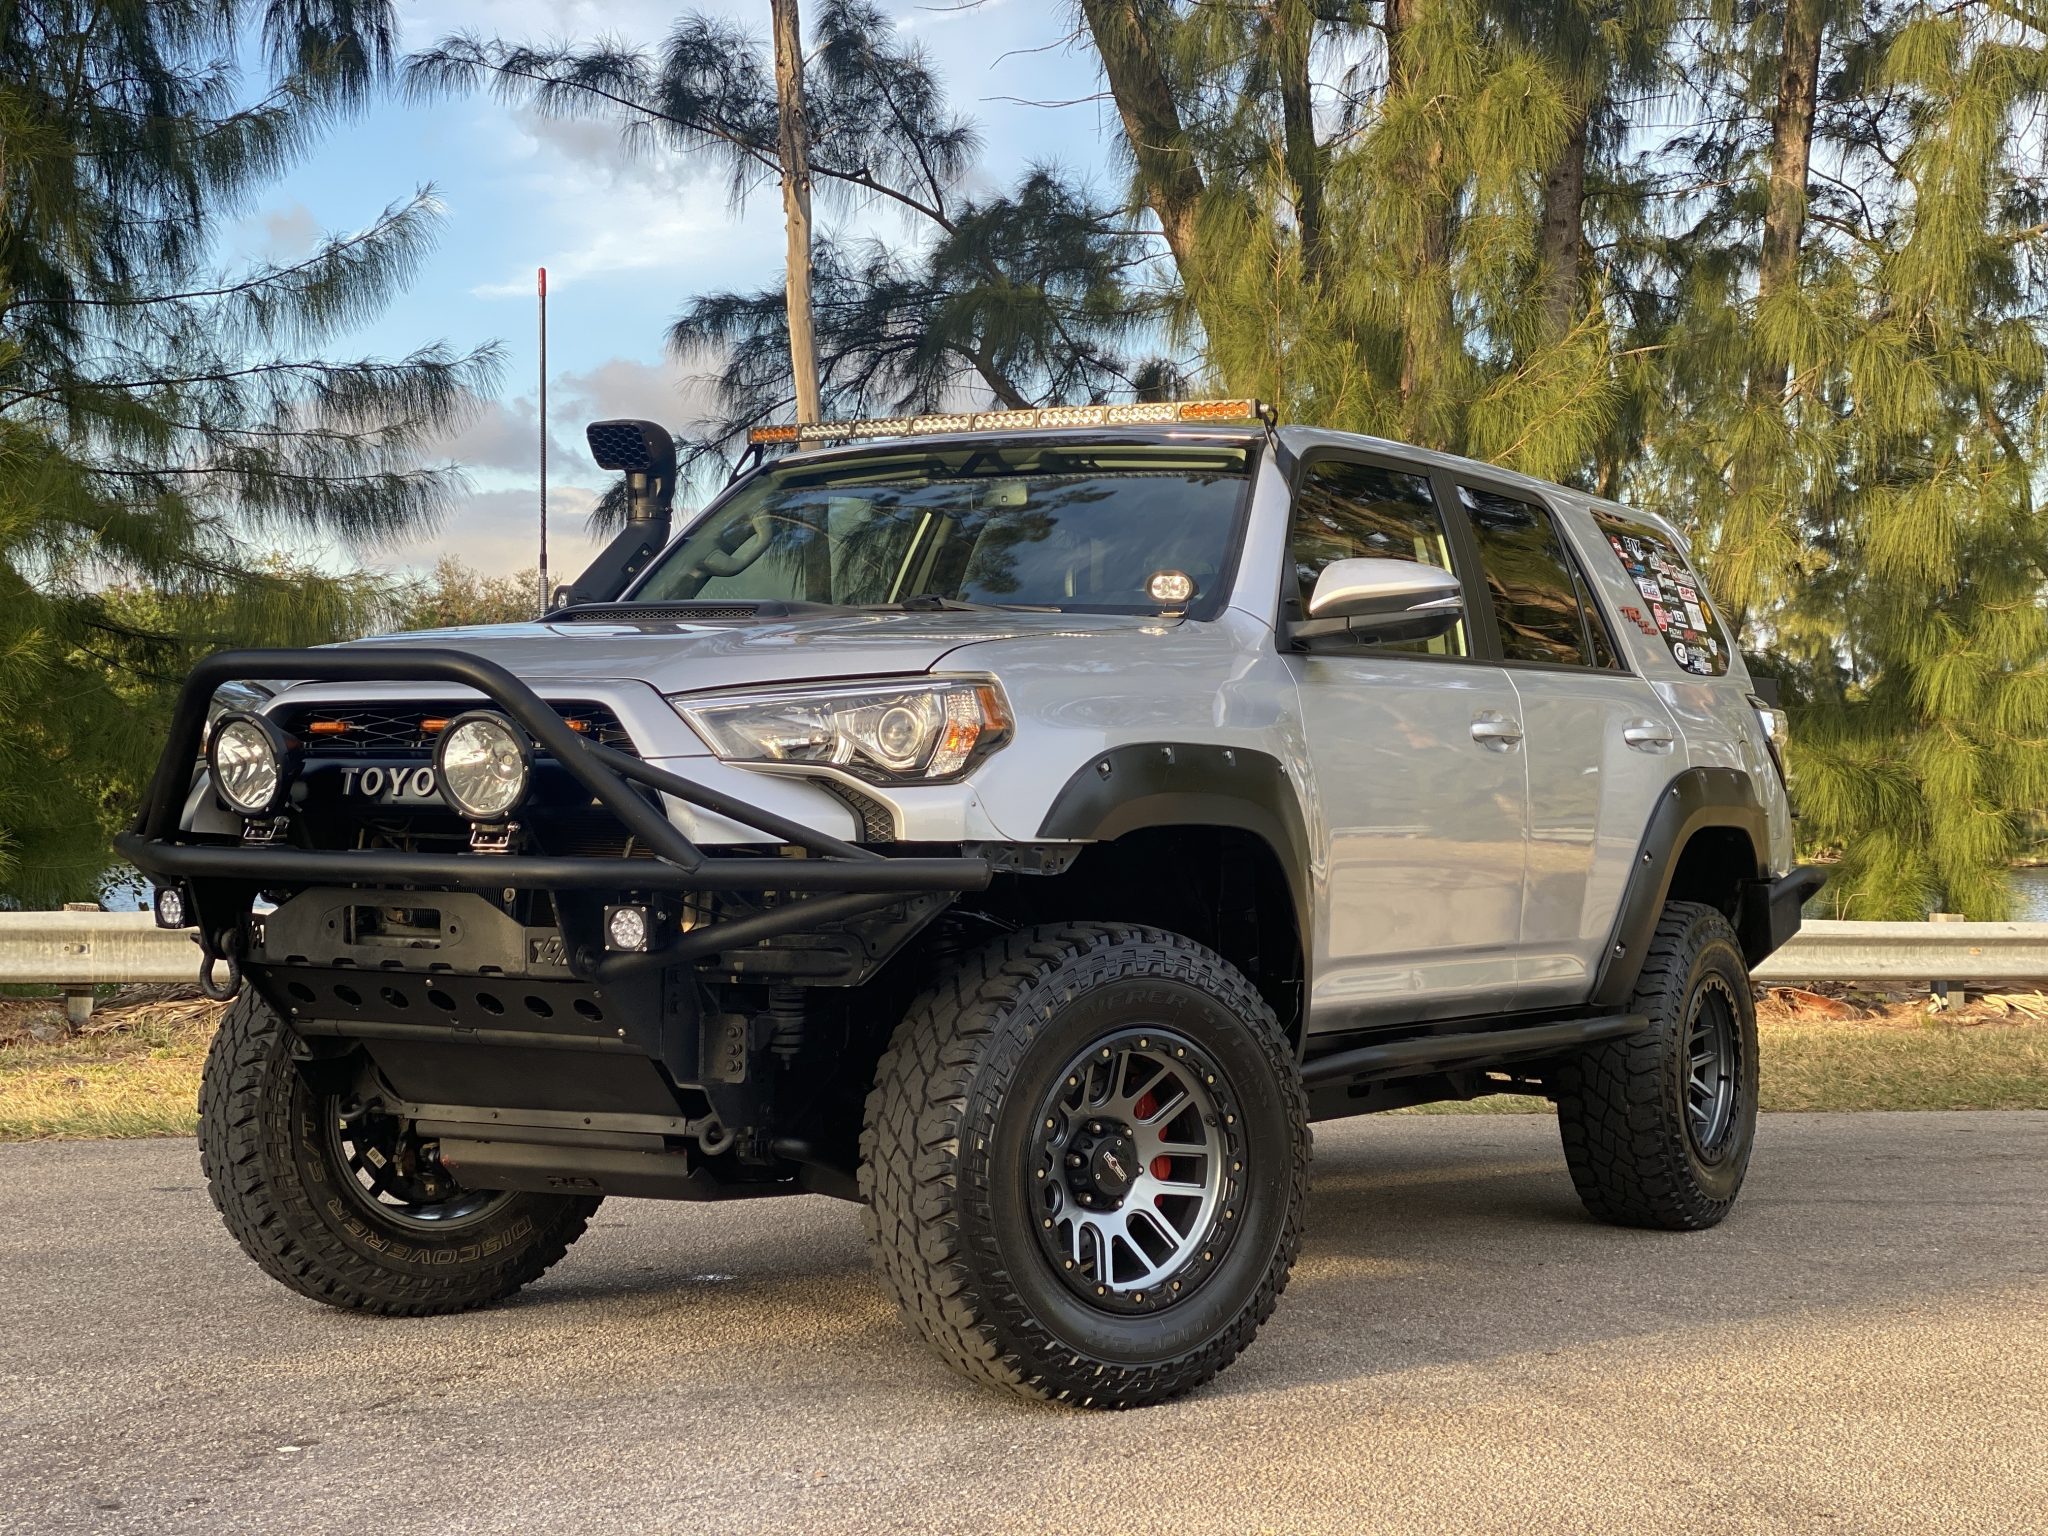 Modified 2018 Toyota 4Runner TRD Off-Road Looks Better Than New One, Is ...